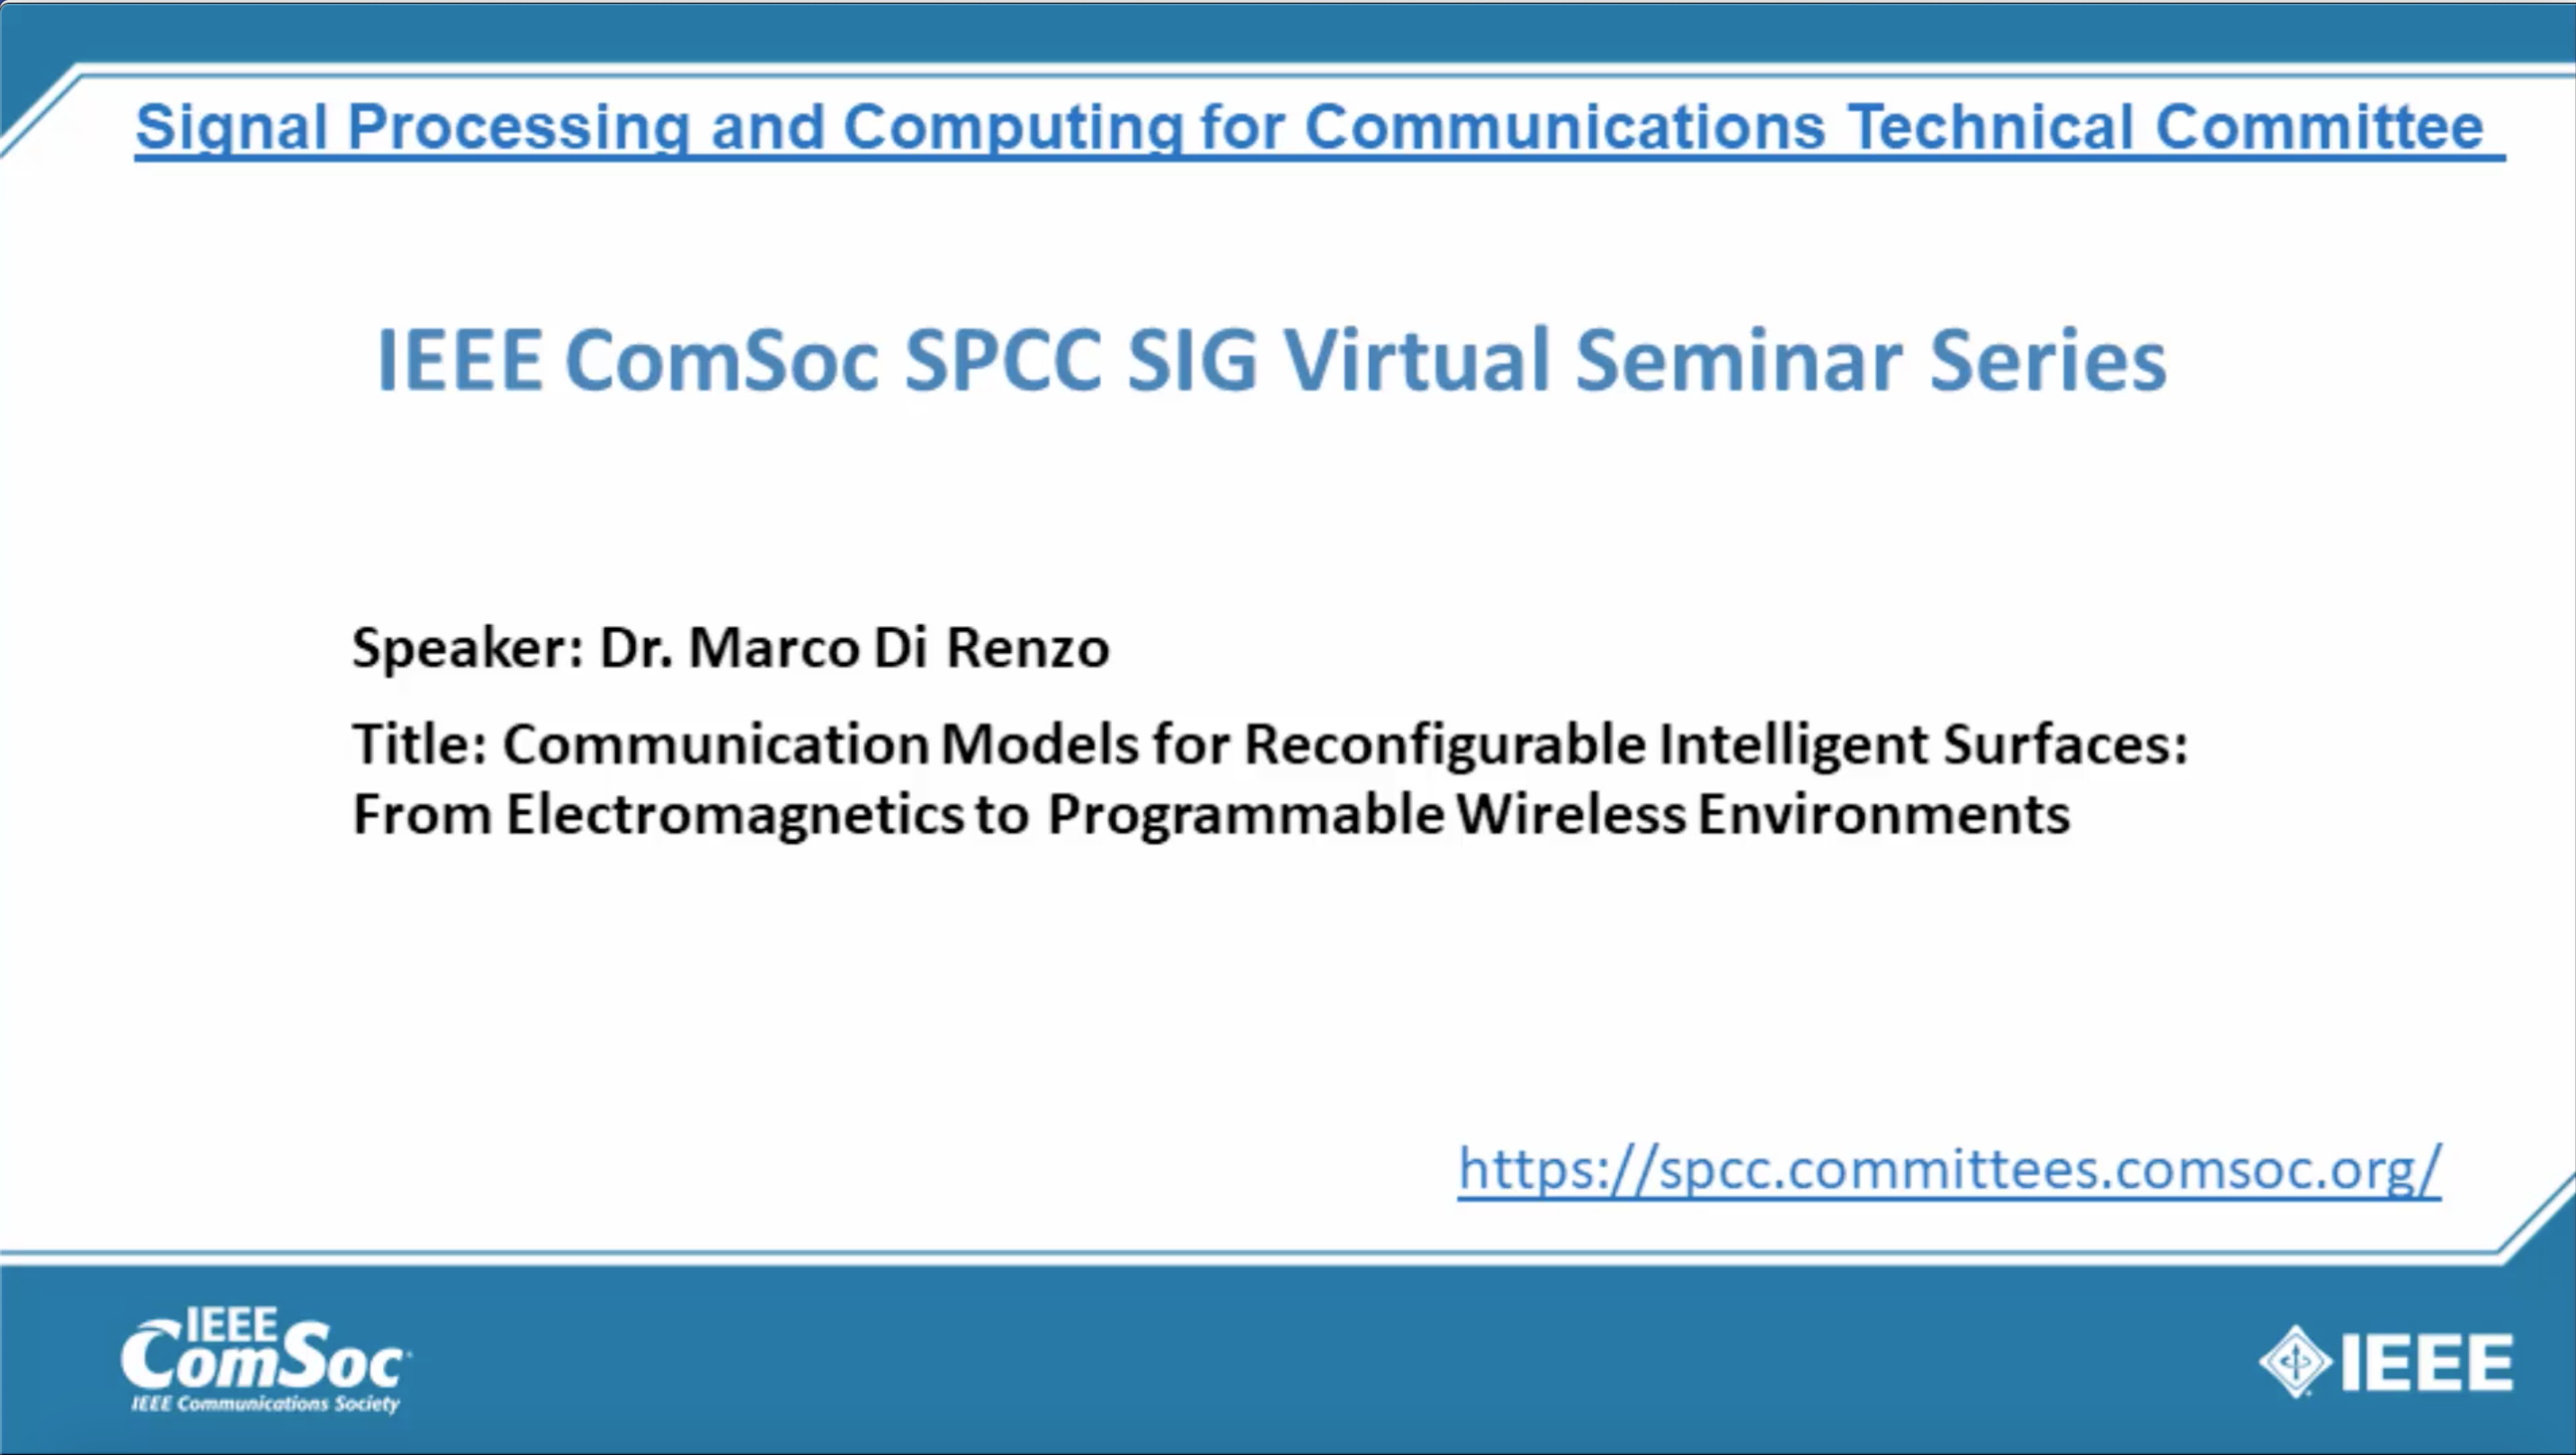 SPCC SIG virtual seminar: Communication Models for Reconfigurable Intelligent Surfaces: From Electromagnetics to Programmable Wireless Environments